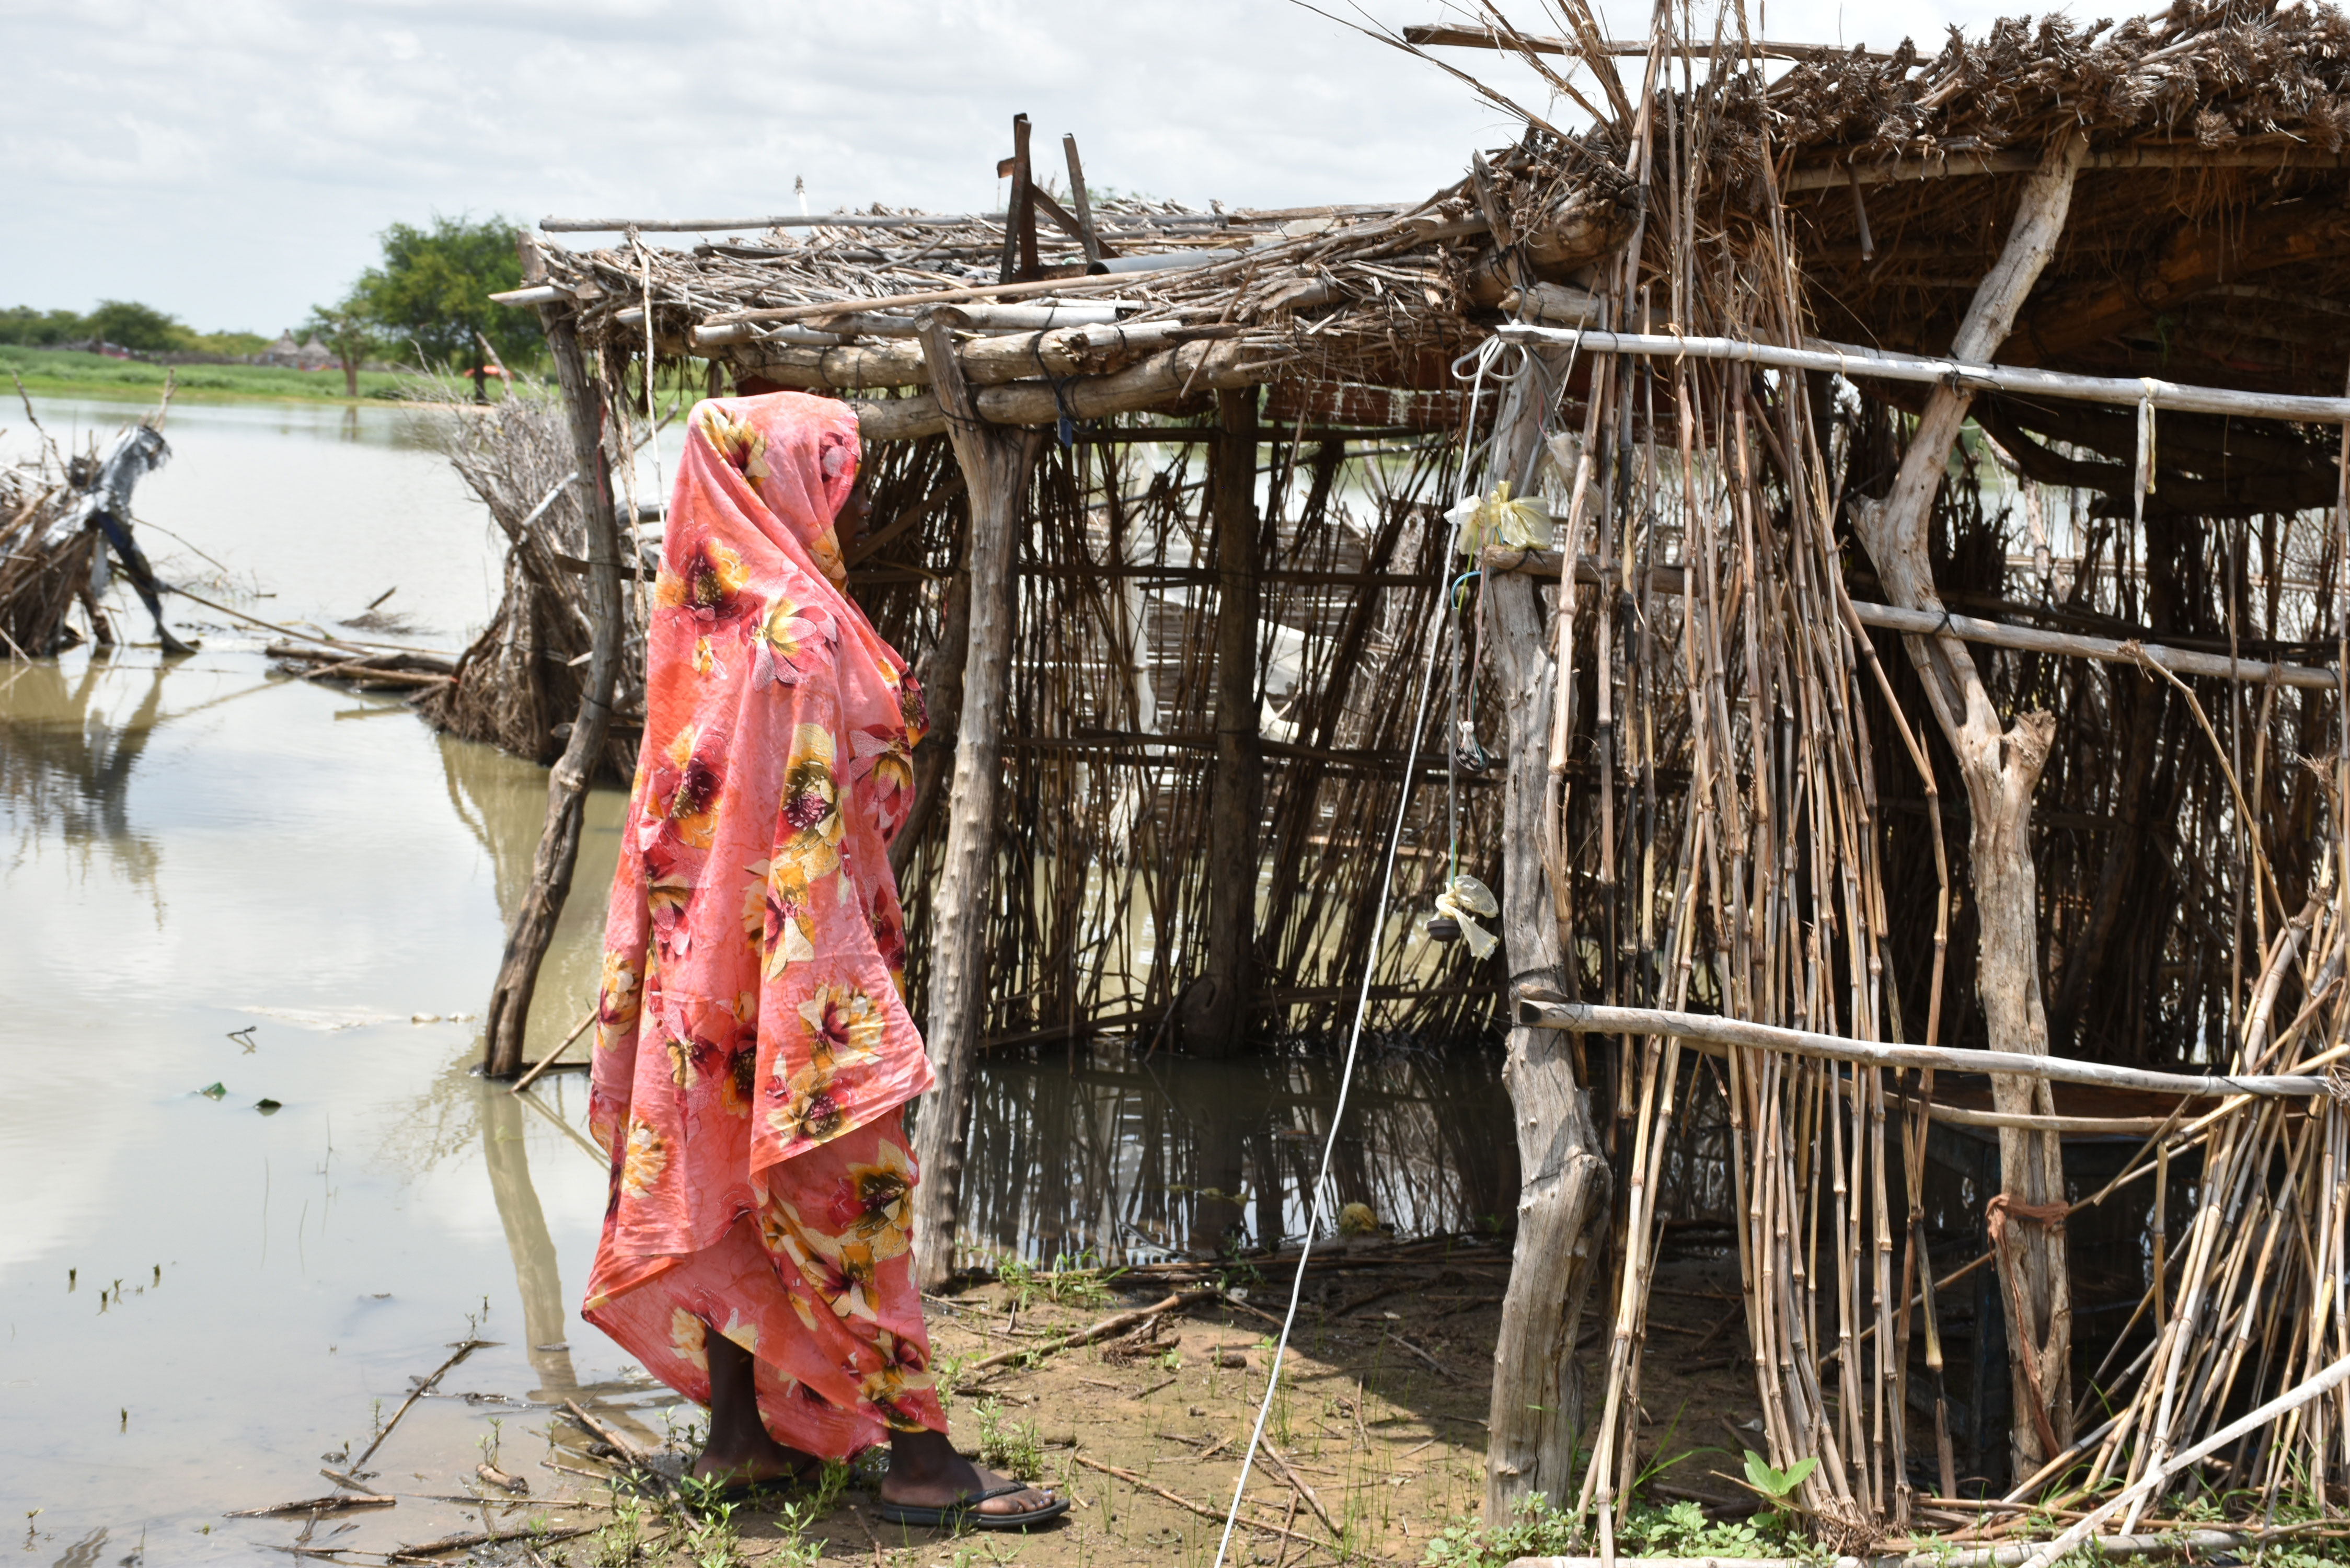 Nisreen is remains hopeful that despite the devastation brought on her household by the floods